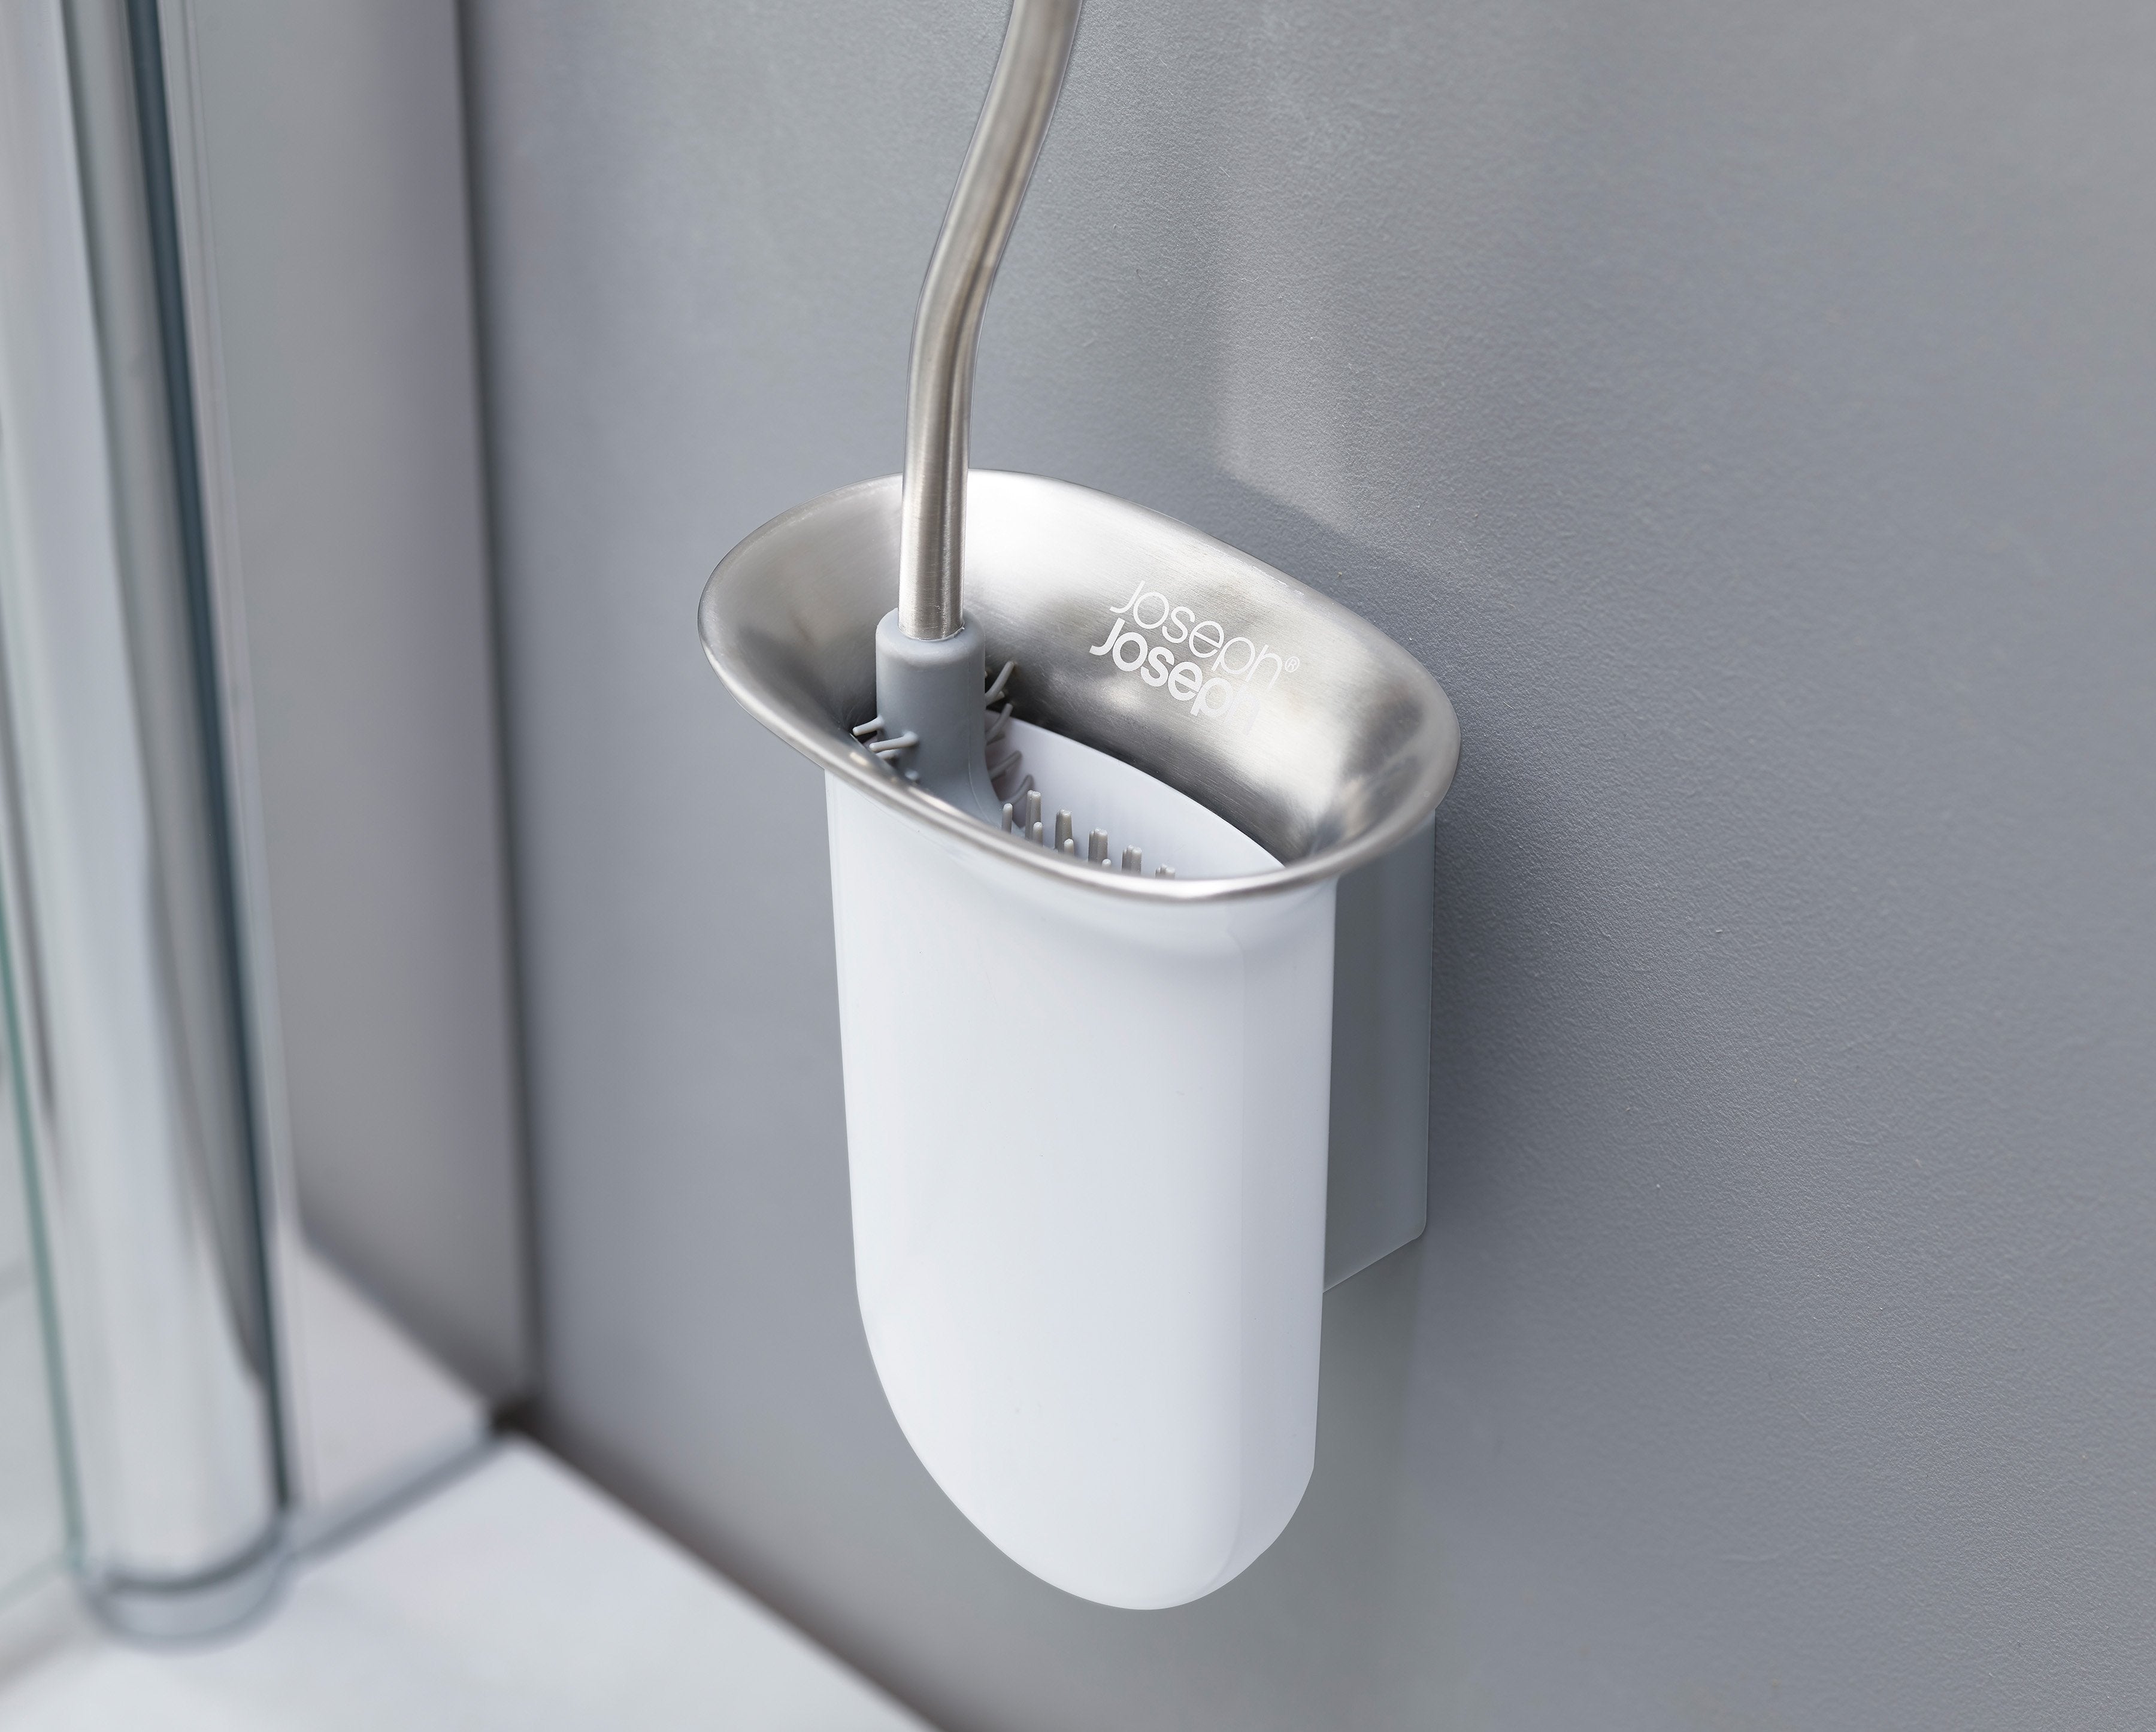 BEON.COM.AU  This version of our bestselling toilet brush comes with a smart wall-mounted holder which saves valuable floor space and makes cleaning easier.  Flexible, D-shaped head reaches all areas, even under the rim Anti-drip: less dripping between cleaning and storing Anti-clog: wide bristle spacing ens... Joseph Joseph at BEON.COM.AU